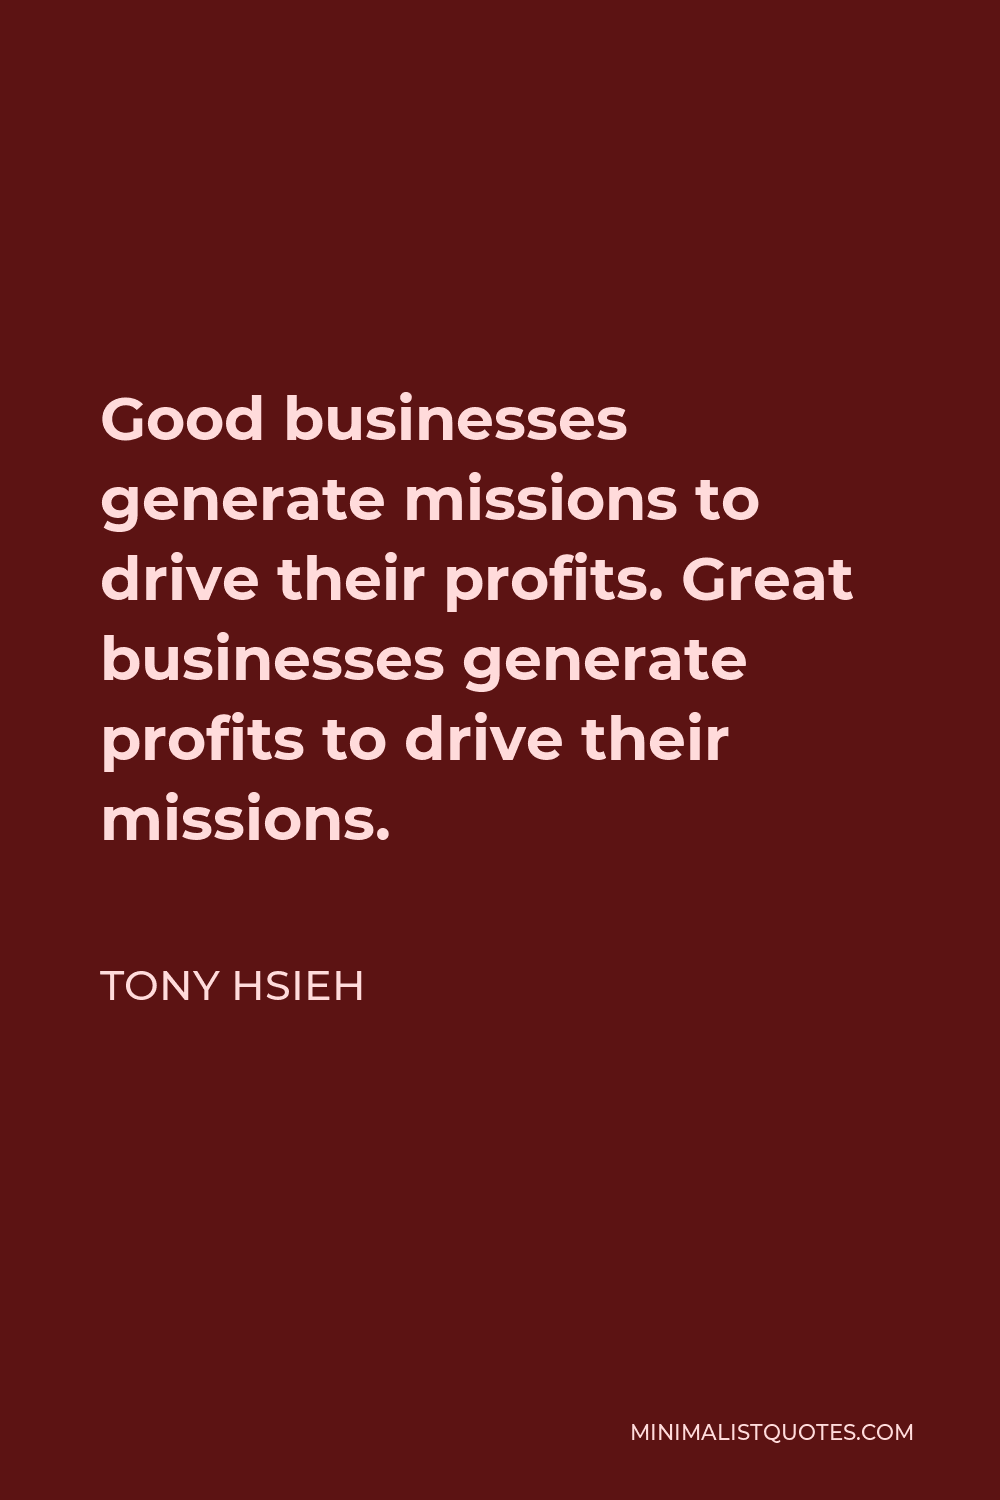 Tony Hsieh Quote - Good businesses generate missions to drive their profits. Great businesses generate profits to drive their missions.